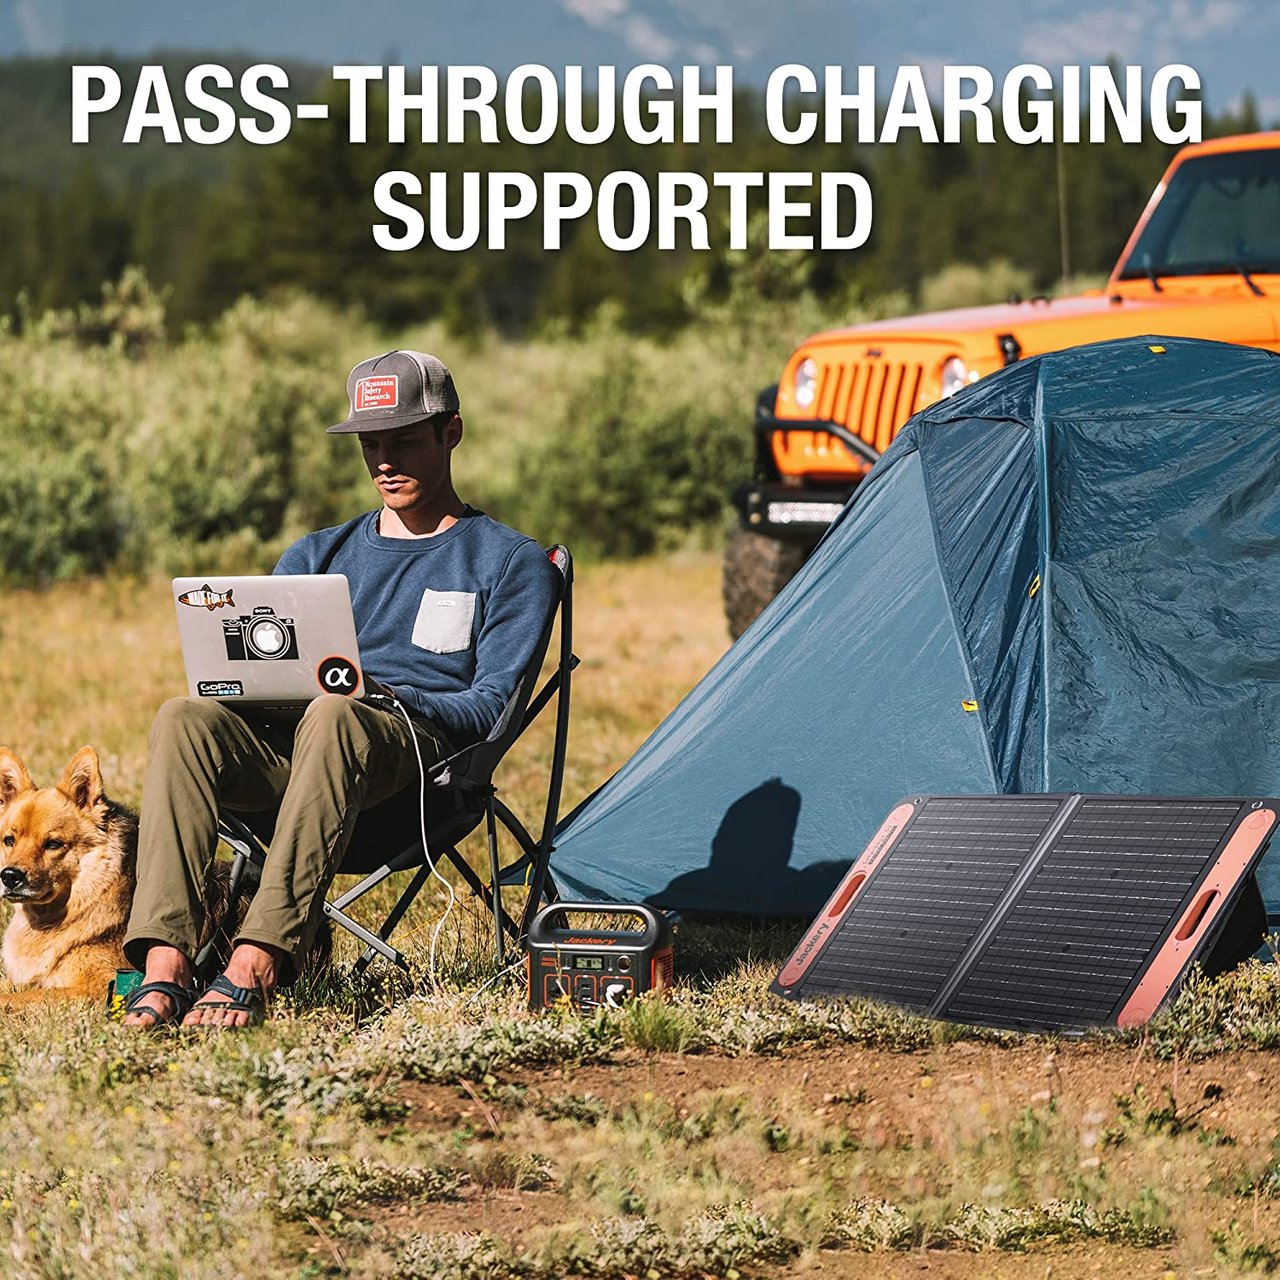 7 Explorer 240 Portable Power Station by Jackery